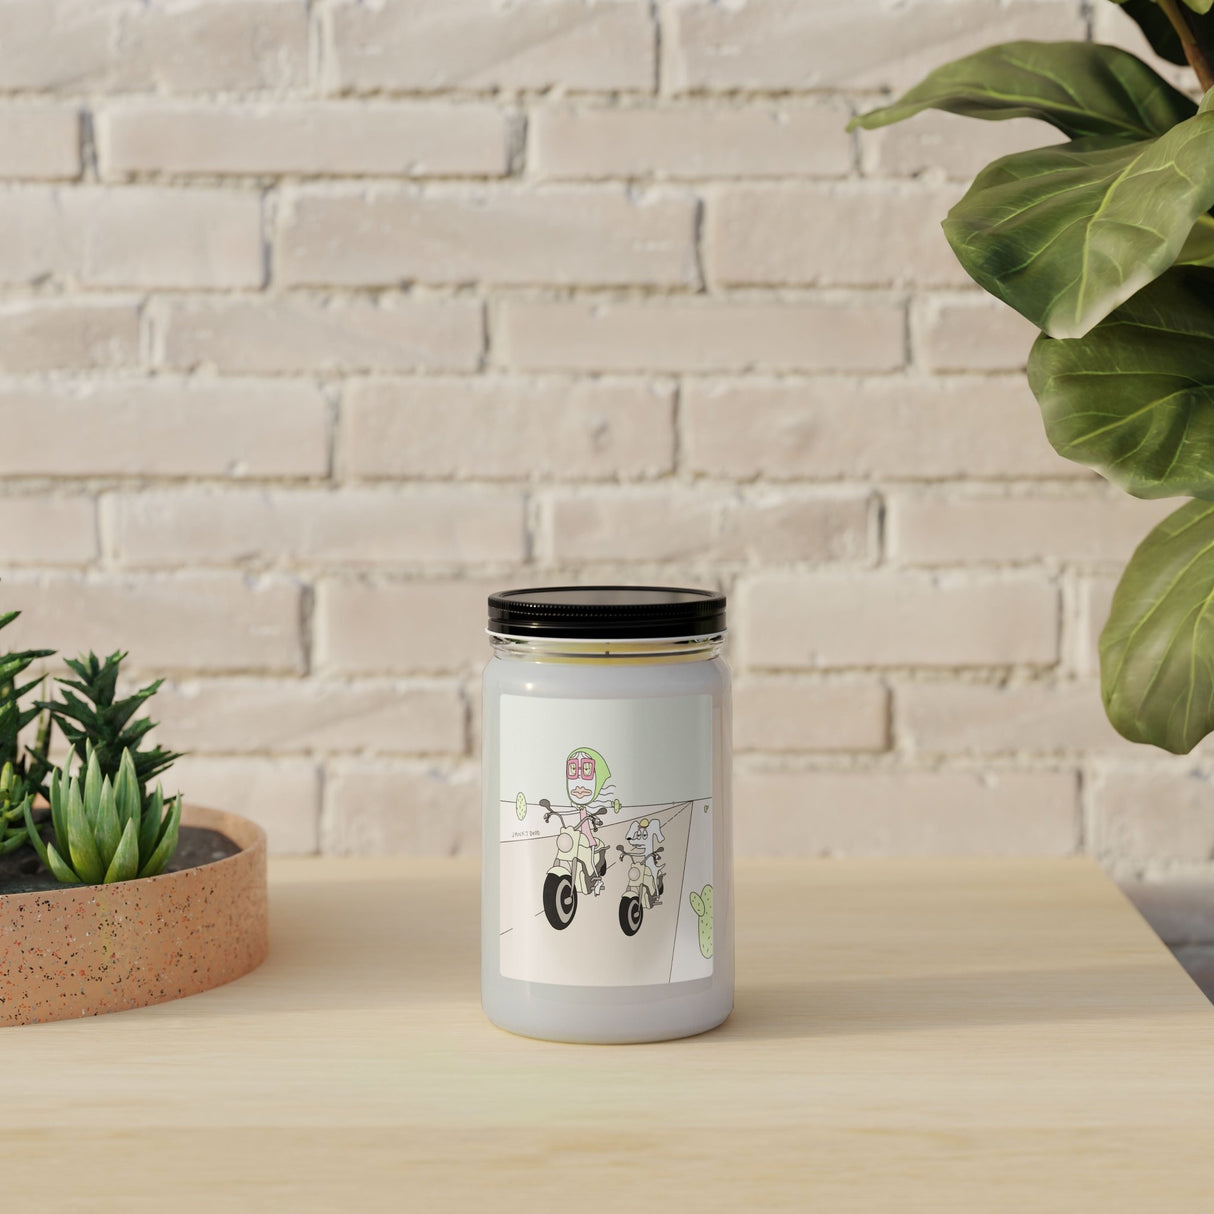 Janky Dood Scented Candle in Mason Jar: We Just Did Something Bad - Candlefy